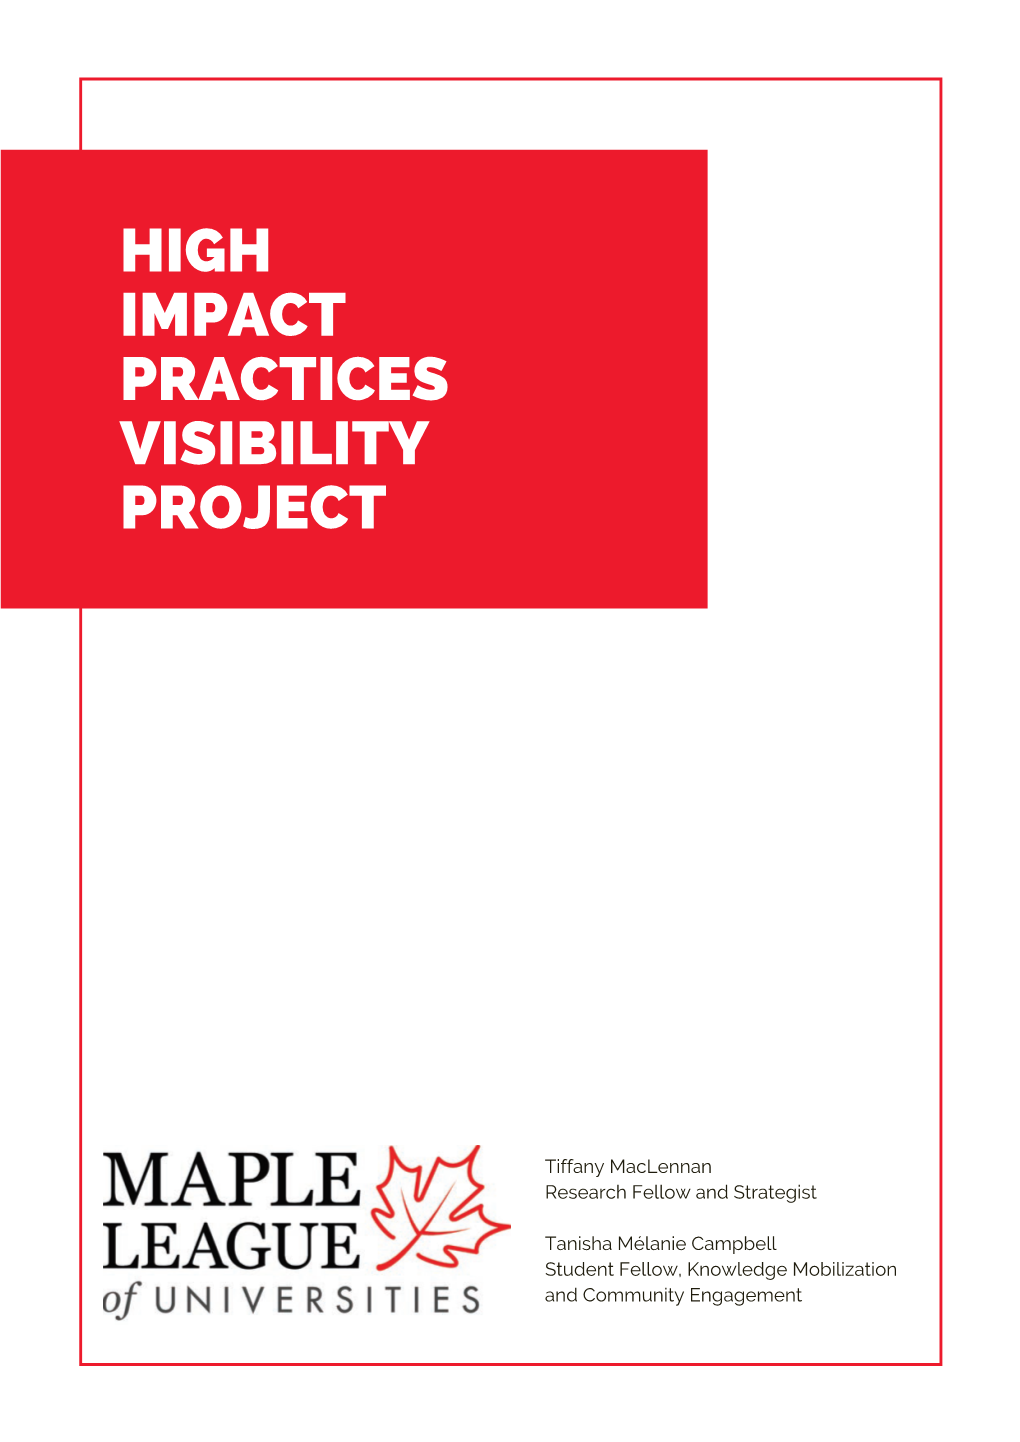 High Impact Practices Visibility Project